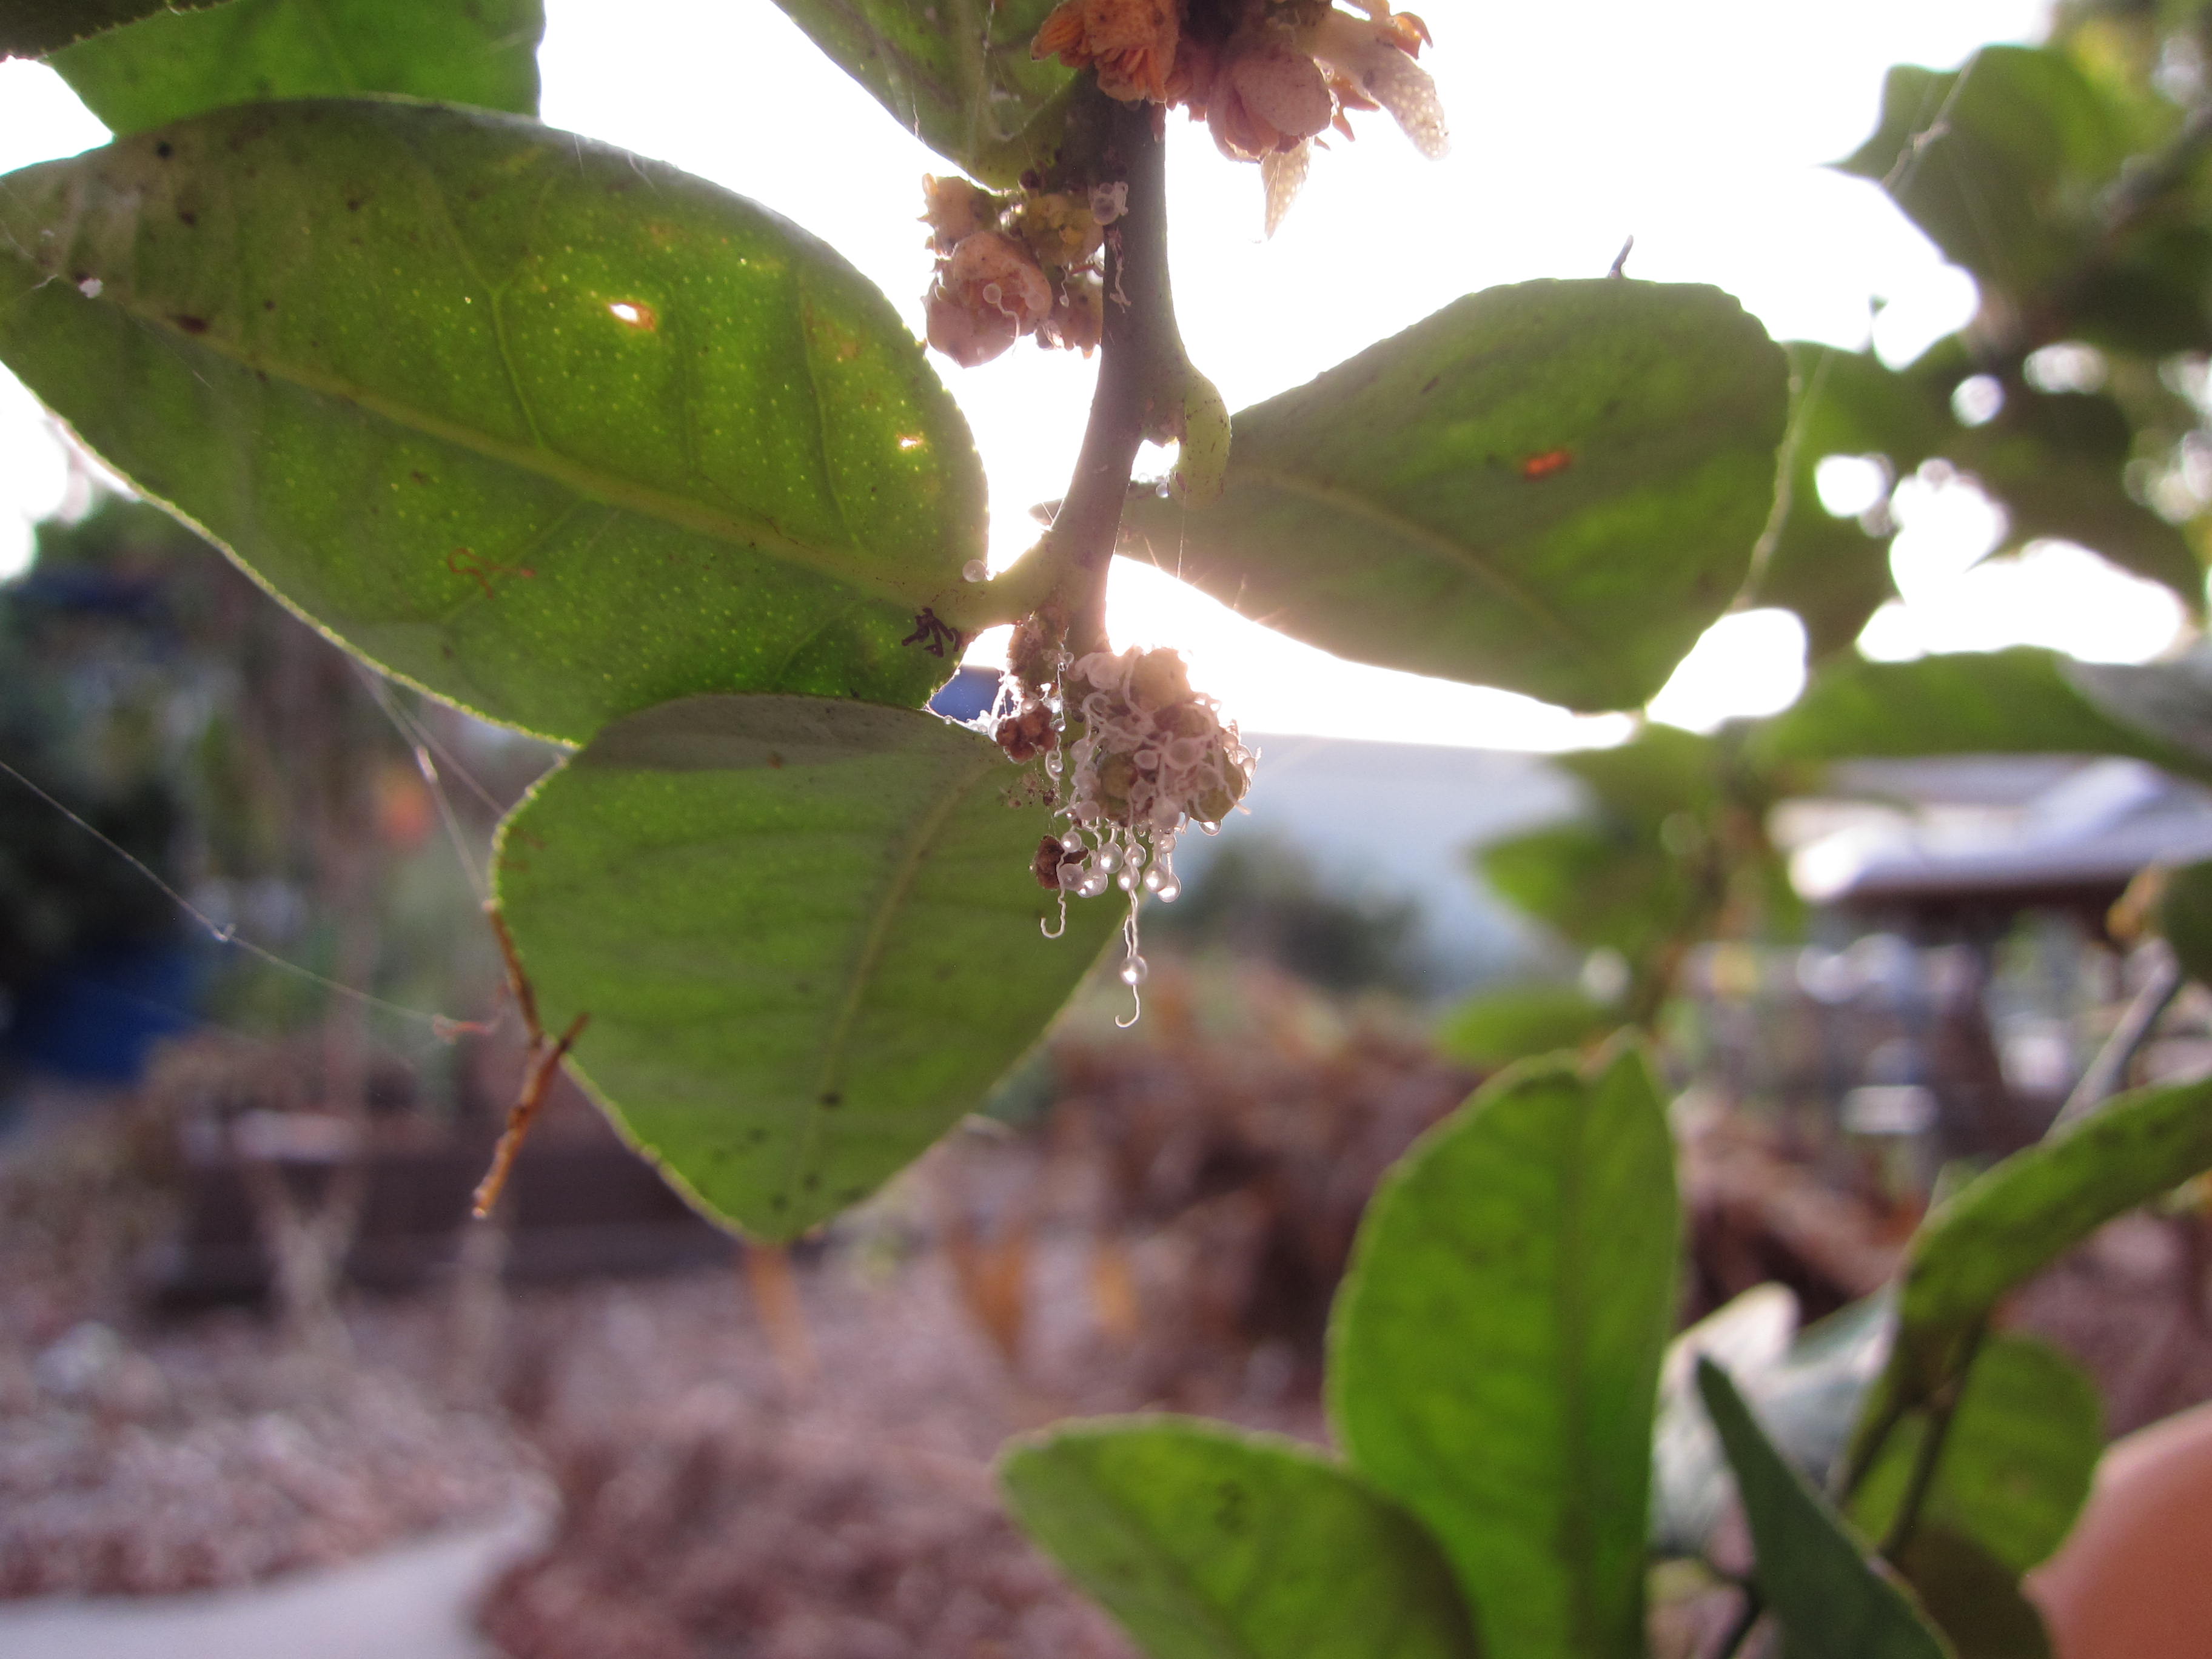 Evidence of the Asian Citrus Psyllid on a cluster of lime flower buds.